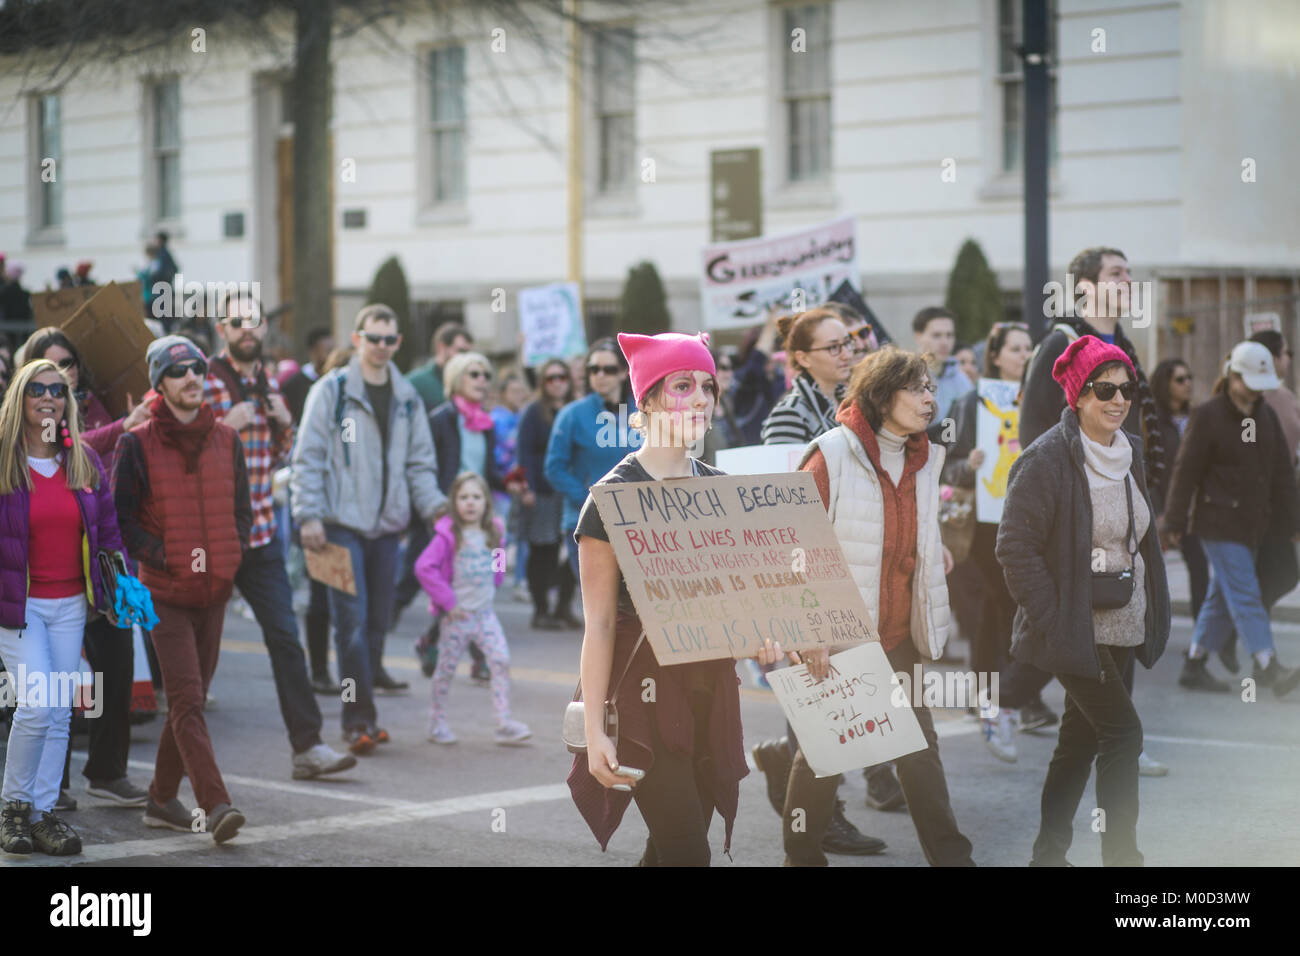 WASHINGTON, DC, USA. 20th January, 2018. Nearly a year after the historic Women's March on Washington, activists gather in the US capital once again to make their voices heard. Protesters marched from the Lincoln Memorial to the White House. Credit: Nicole Glass / Alamy Live News. Stock Photo